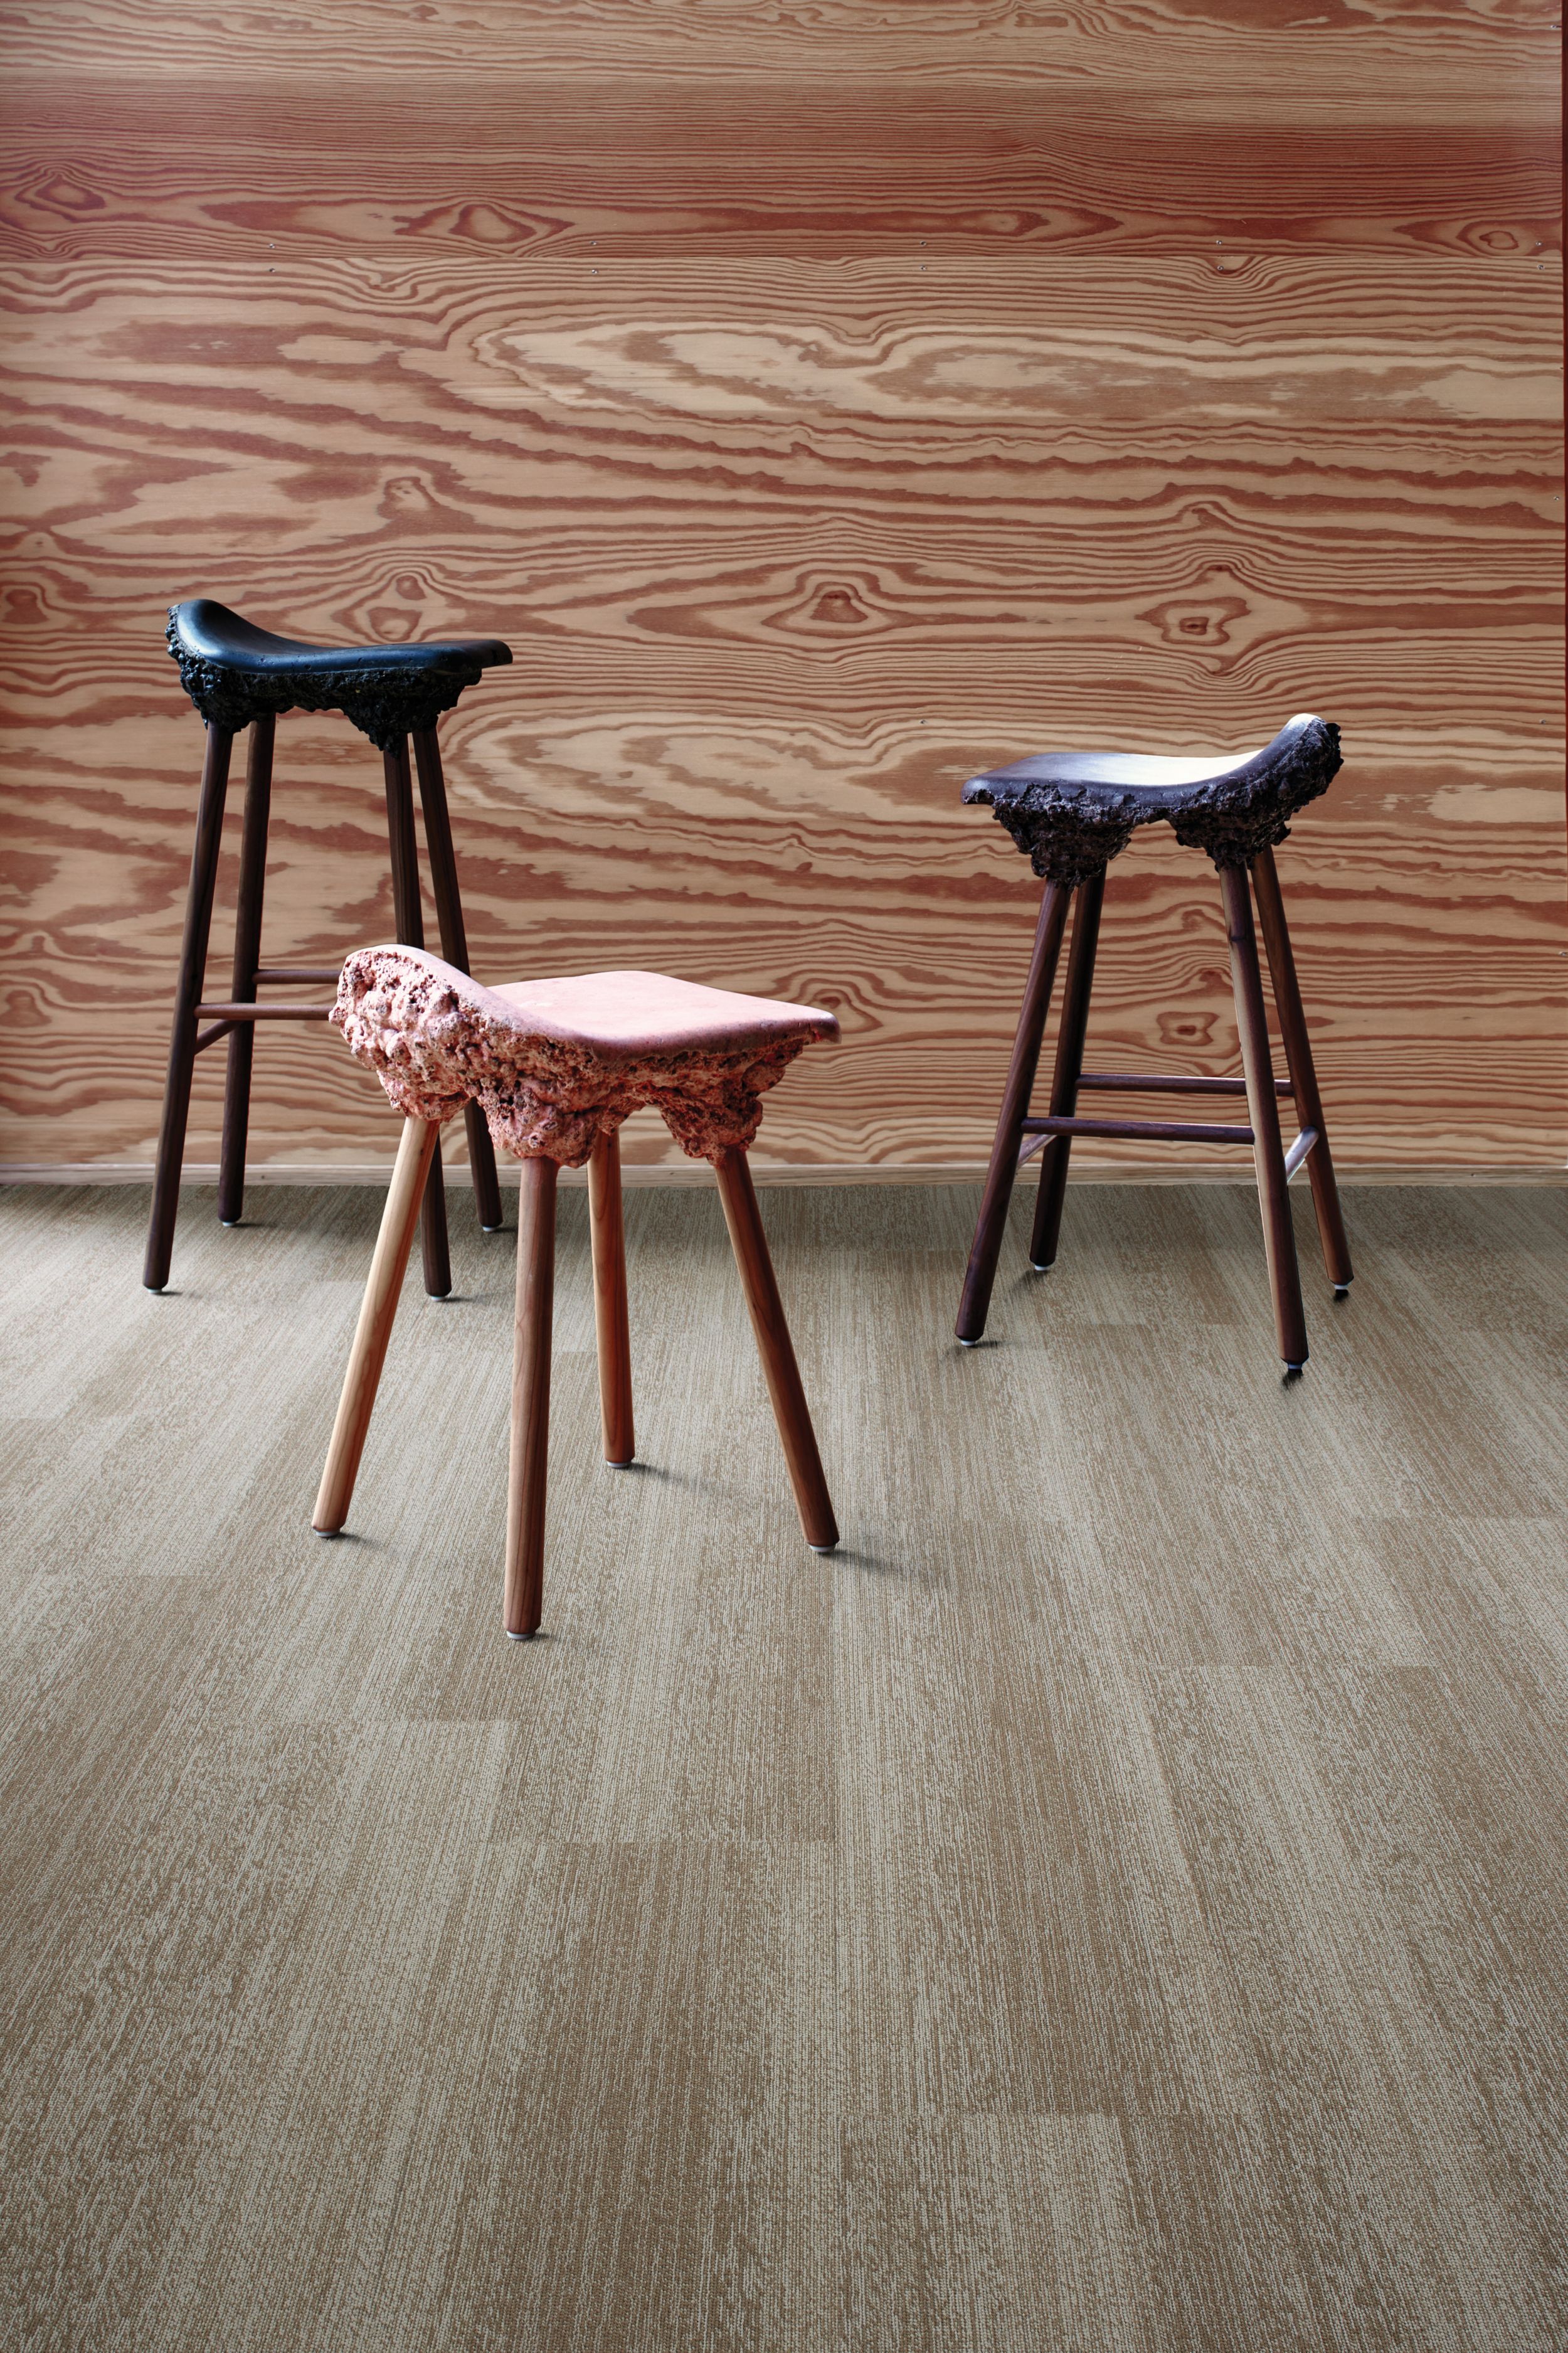 Interface Touch of Timber plank carpet tile in room with plywood wall and three unusual stools Bildnummer 1